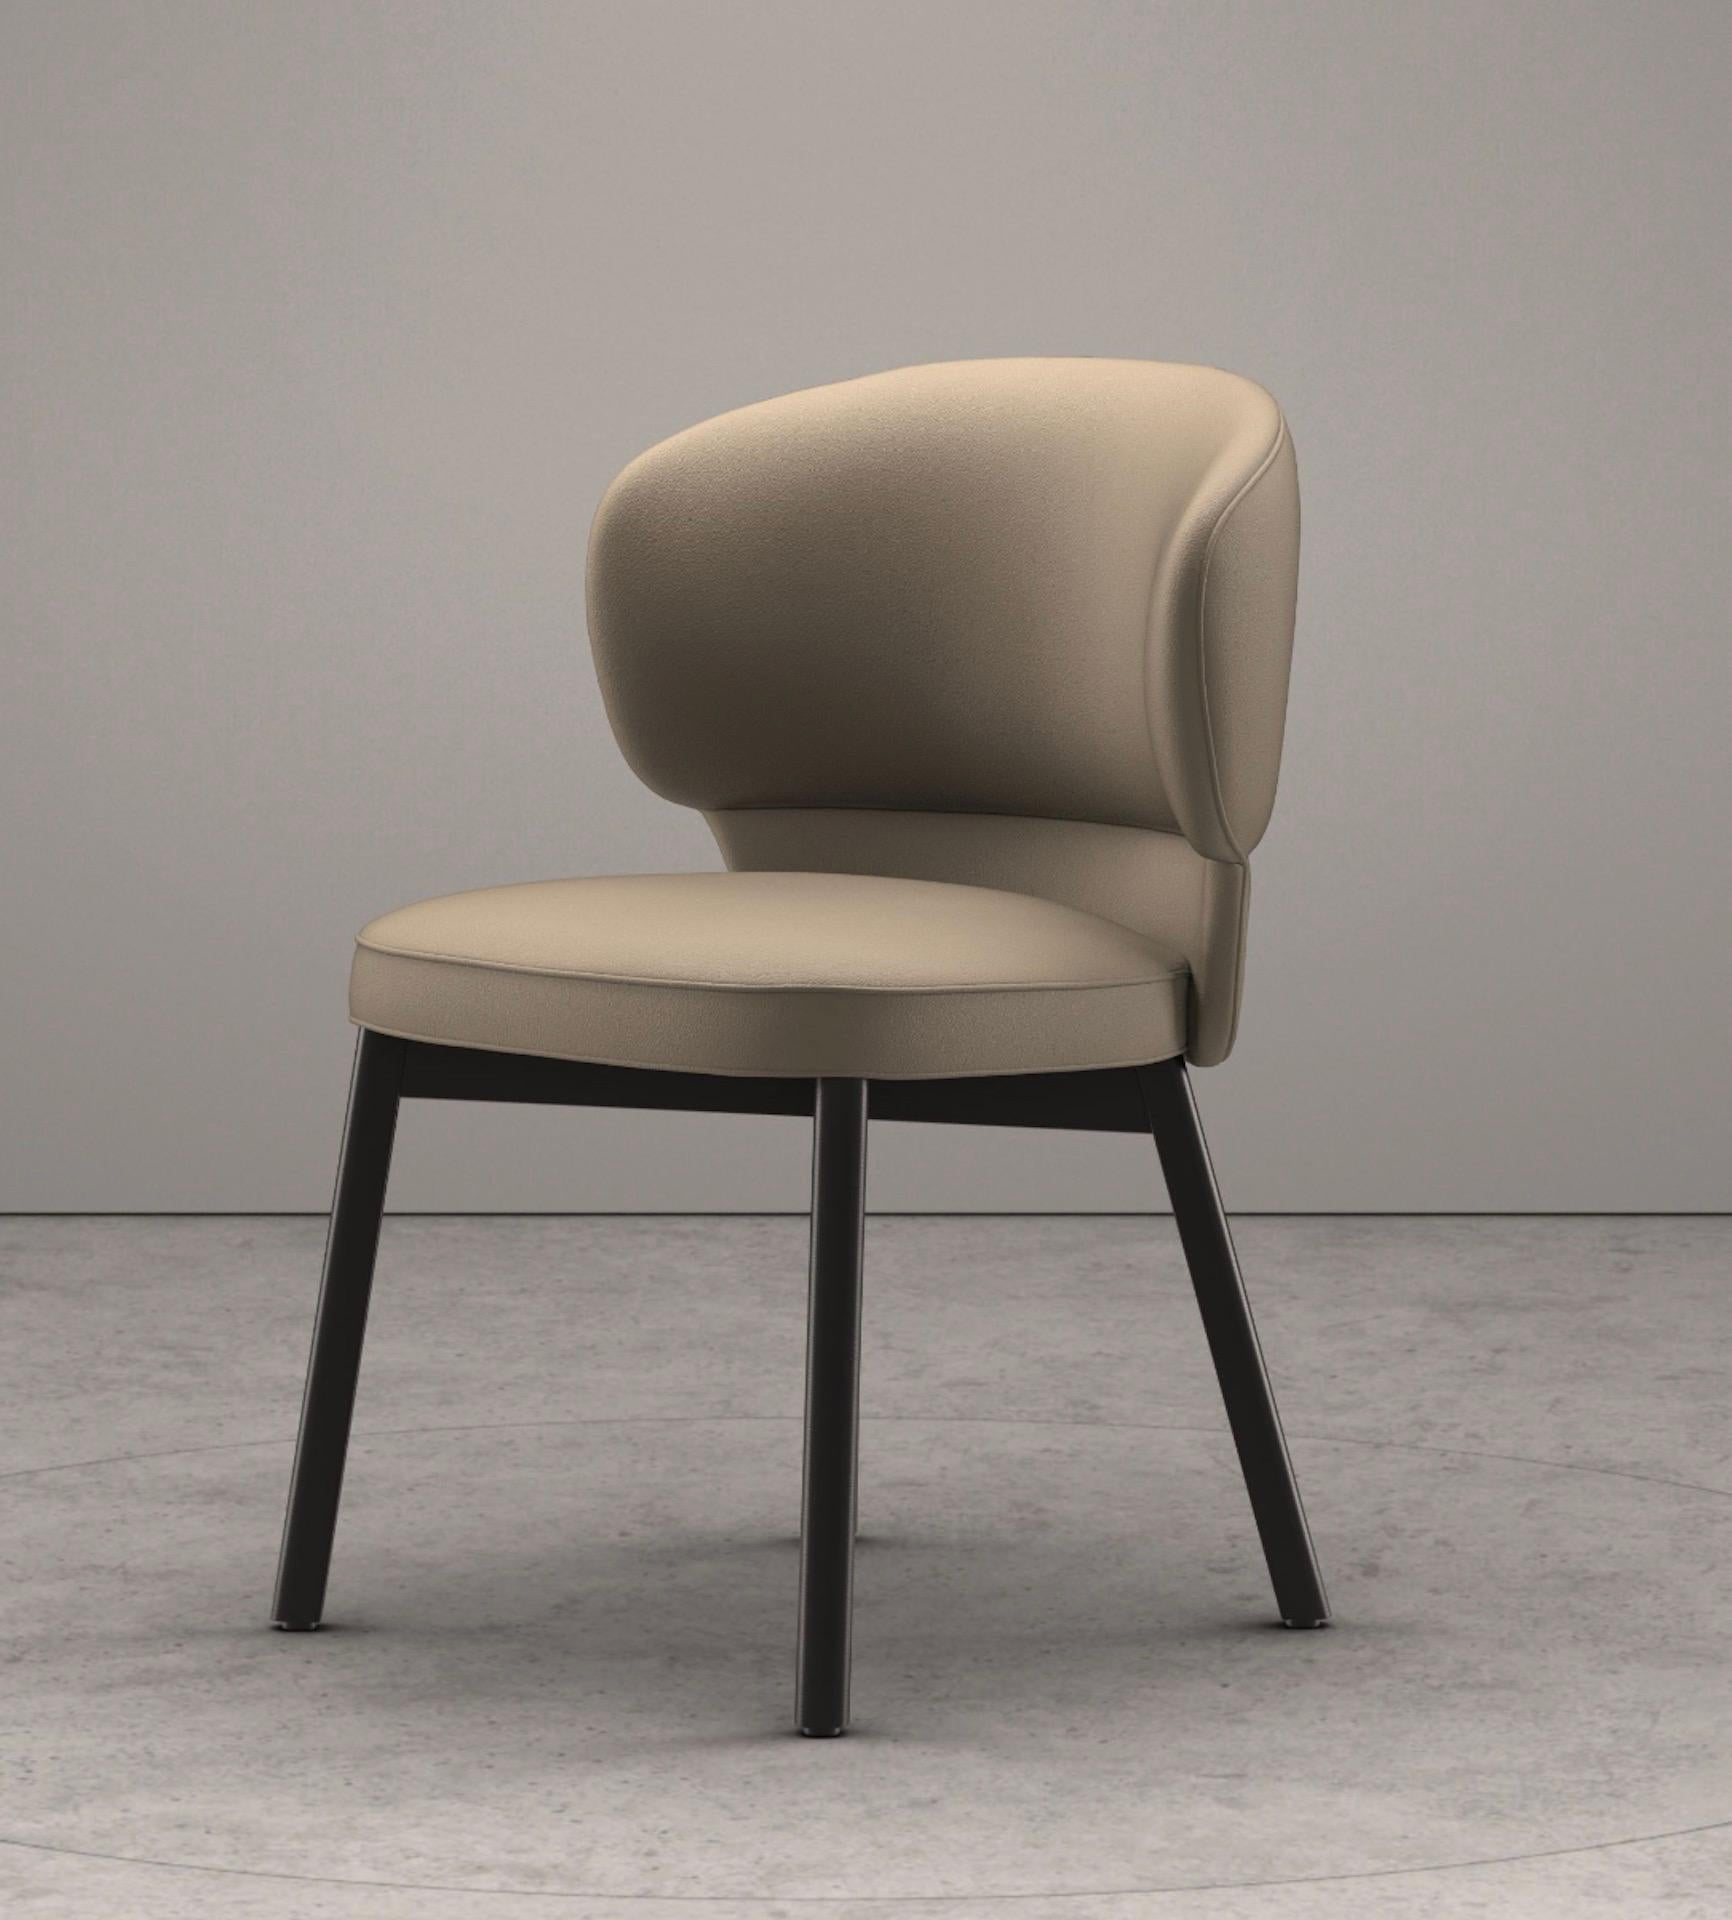 dimensions: W 57cm, seat width 48cm, H 82cm, seat height 49cm, D 62cm, seat depth 50cm
legs: ash black lacquered
Upholstered: Nappa stone 
MORTON is a statement – a deft blend of elegant upholstered chair and armchair that holds its own both at a